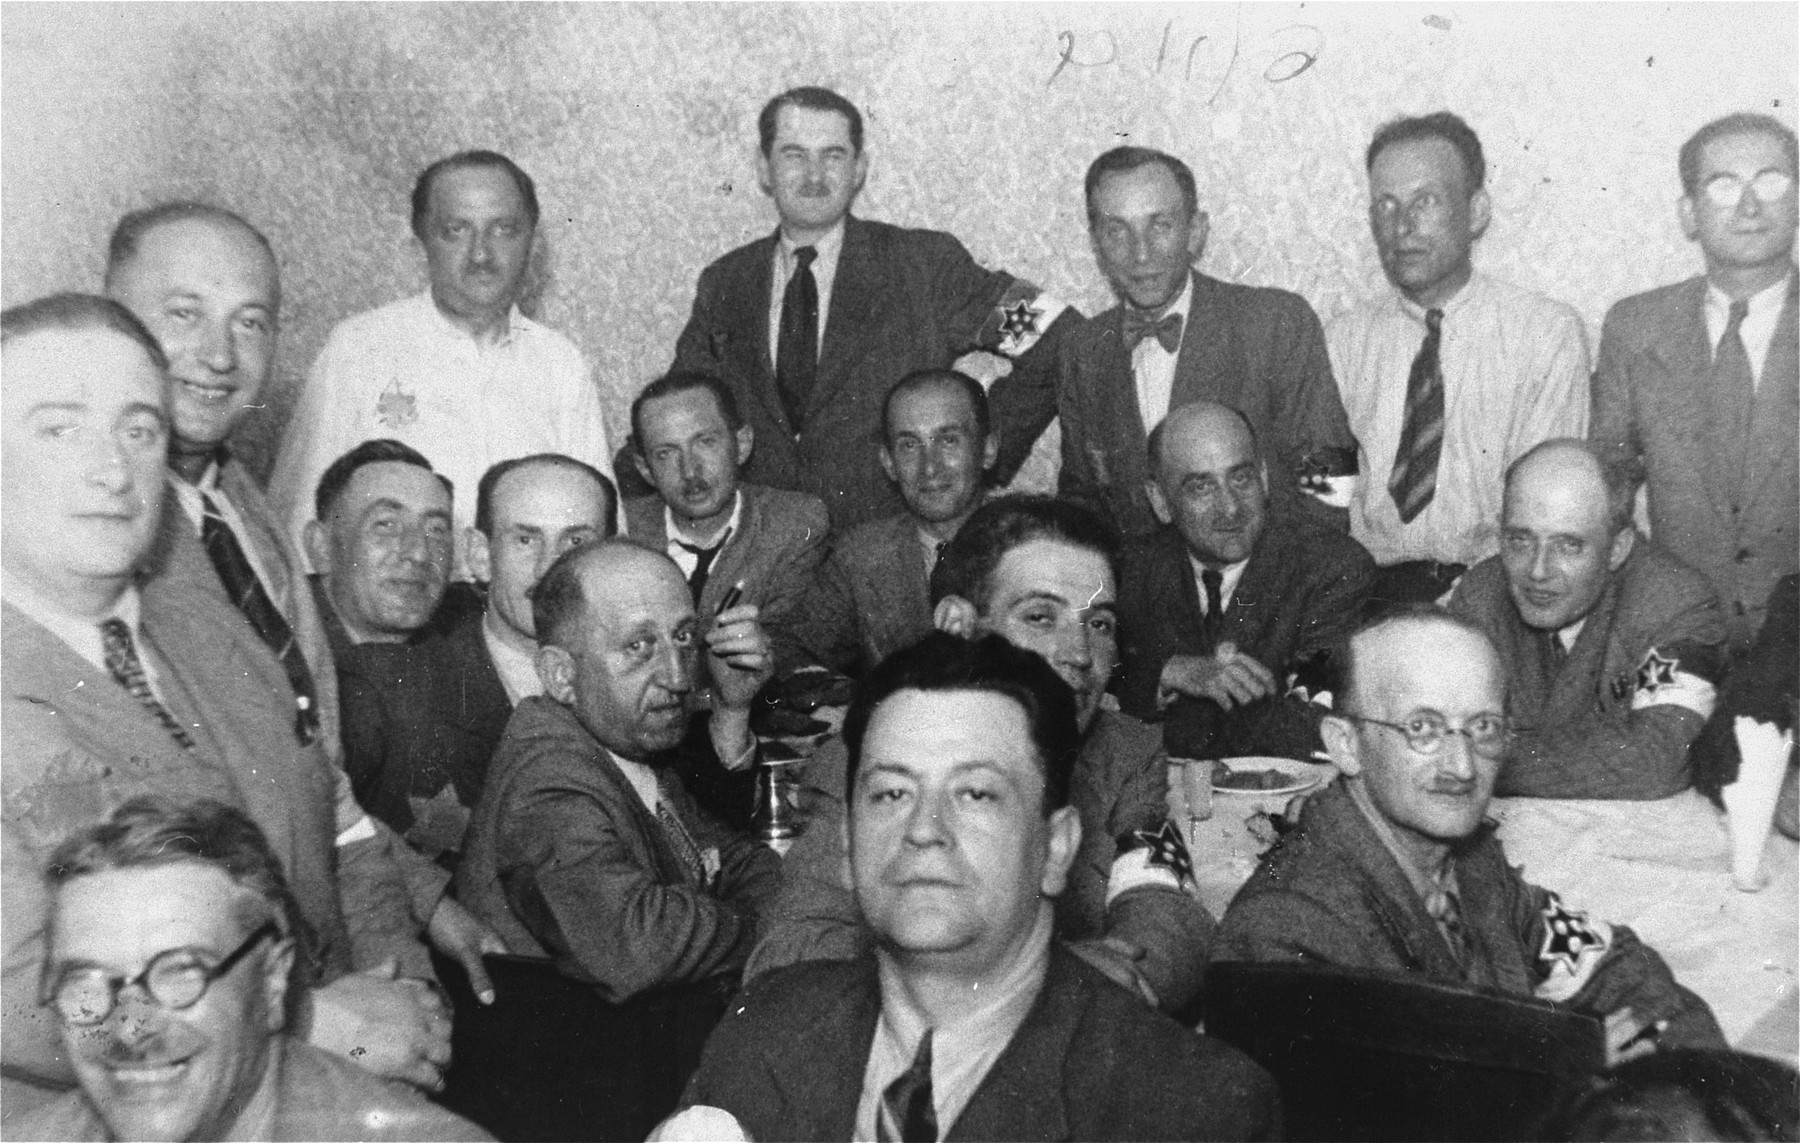 Members of the Lodz ghetto administration, including heads of workshops, police and members of the Sonderkommando, at a social gathering. 

Among those pictured are Abram Josef (Alfred) Chimowicz, head of the housing authority (seated in front, in the center), Leon Rozenblat, chief of the Jewish Police (seated on the far side of the table, second from the right) and Zeligman, head of one of the police precincts (standing in the back row, center).